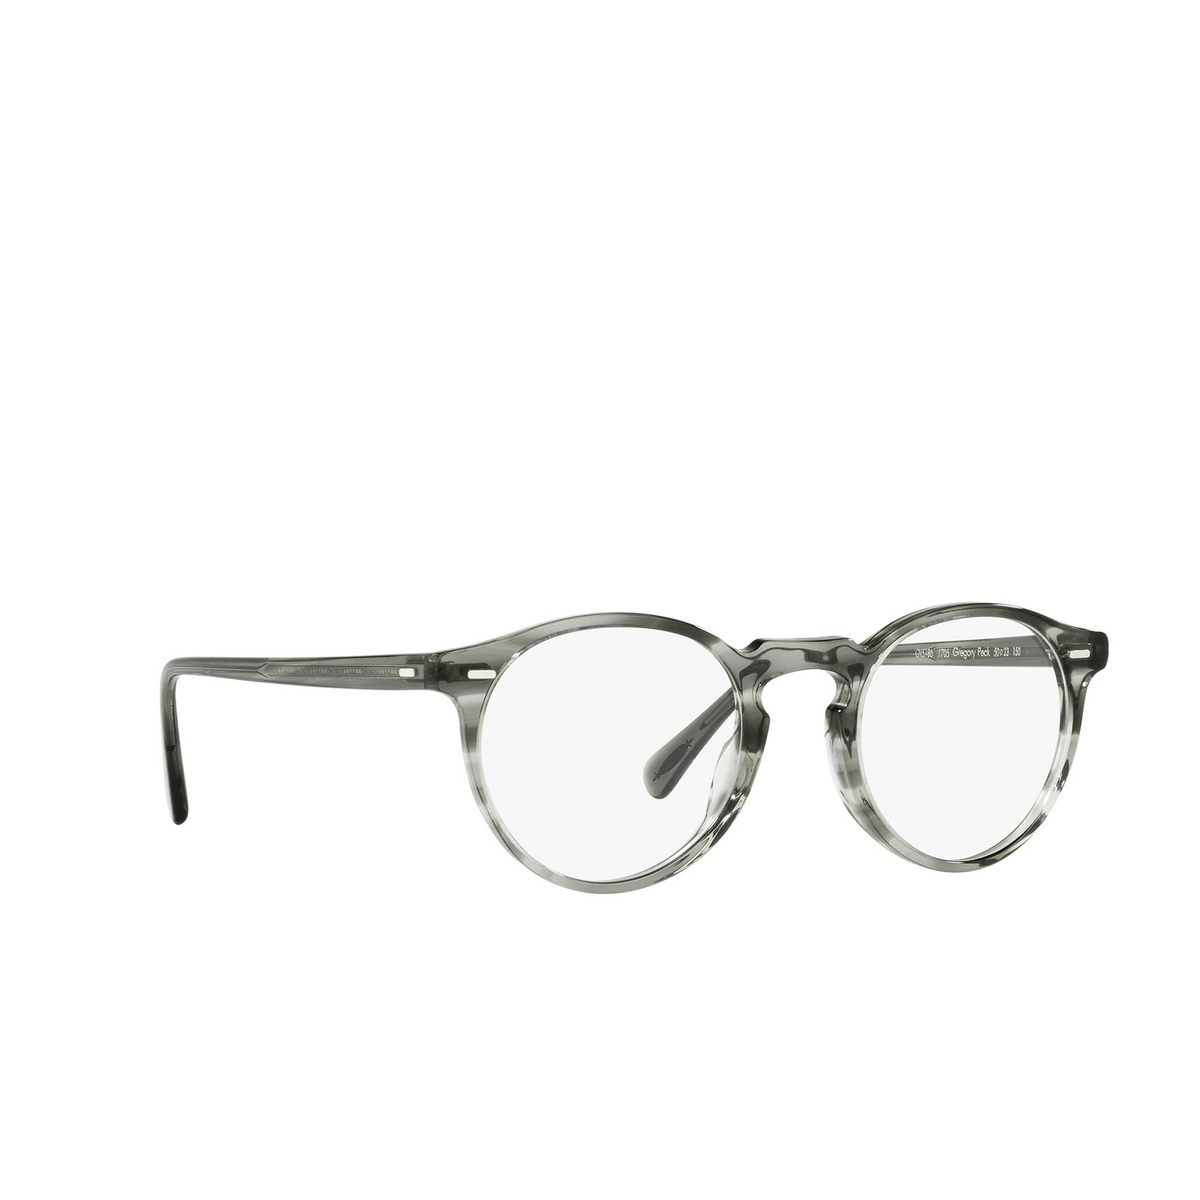 Oliver Peoples GREGORY PECK Eyeglasses 1705 Washed Jade - three-quarters view